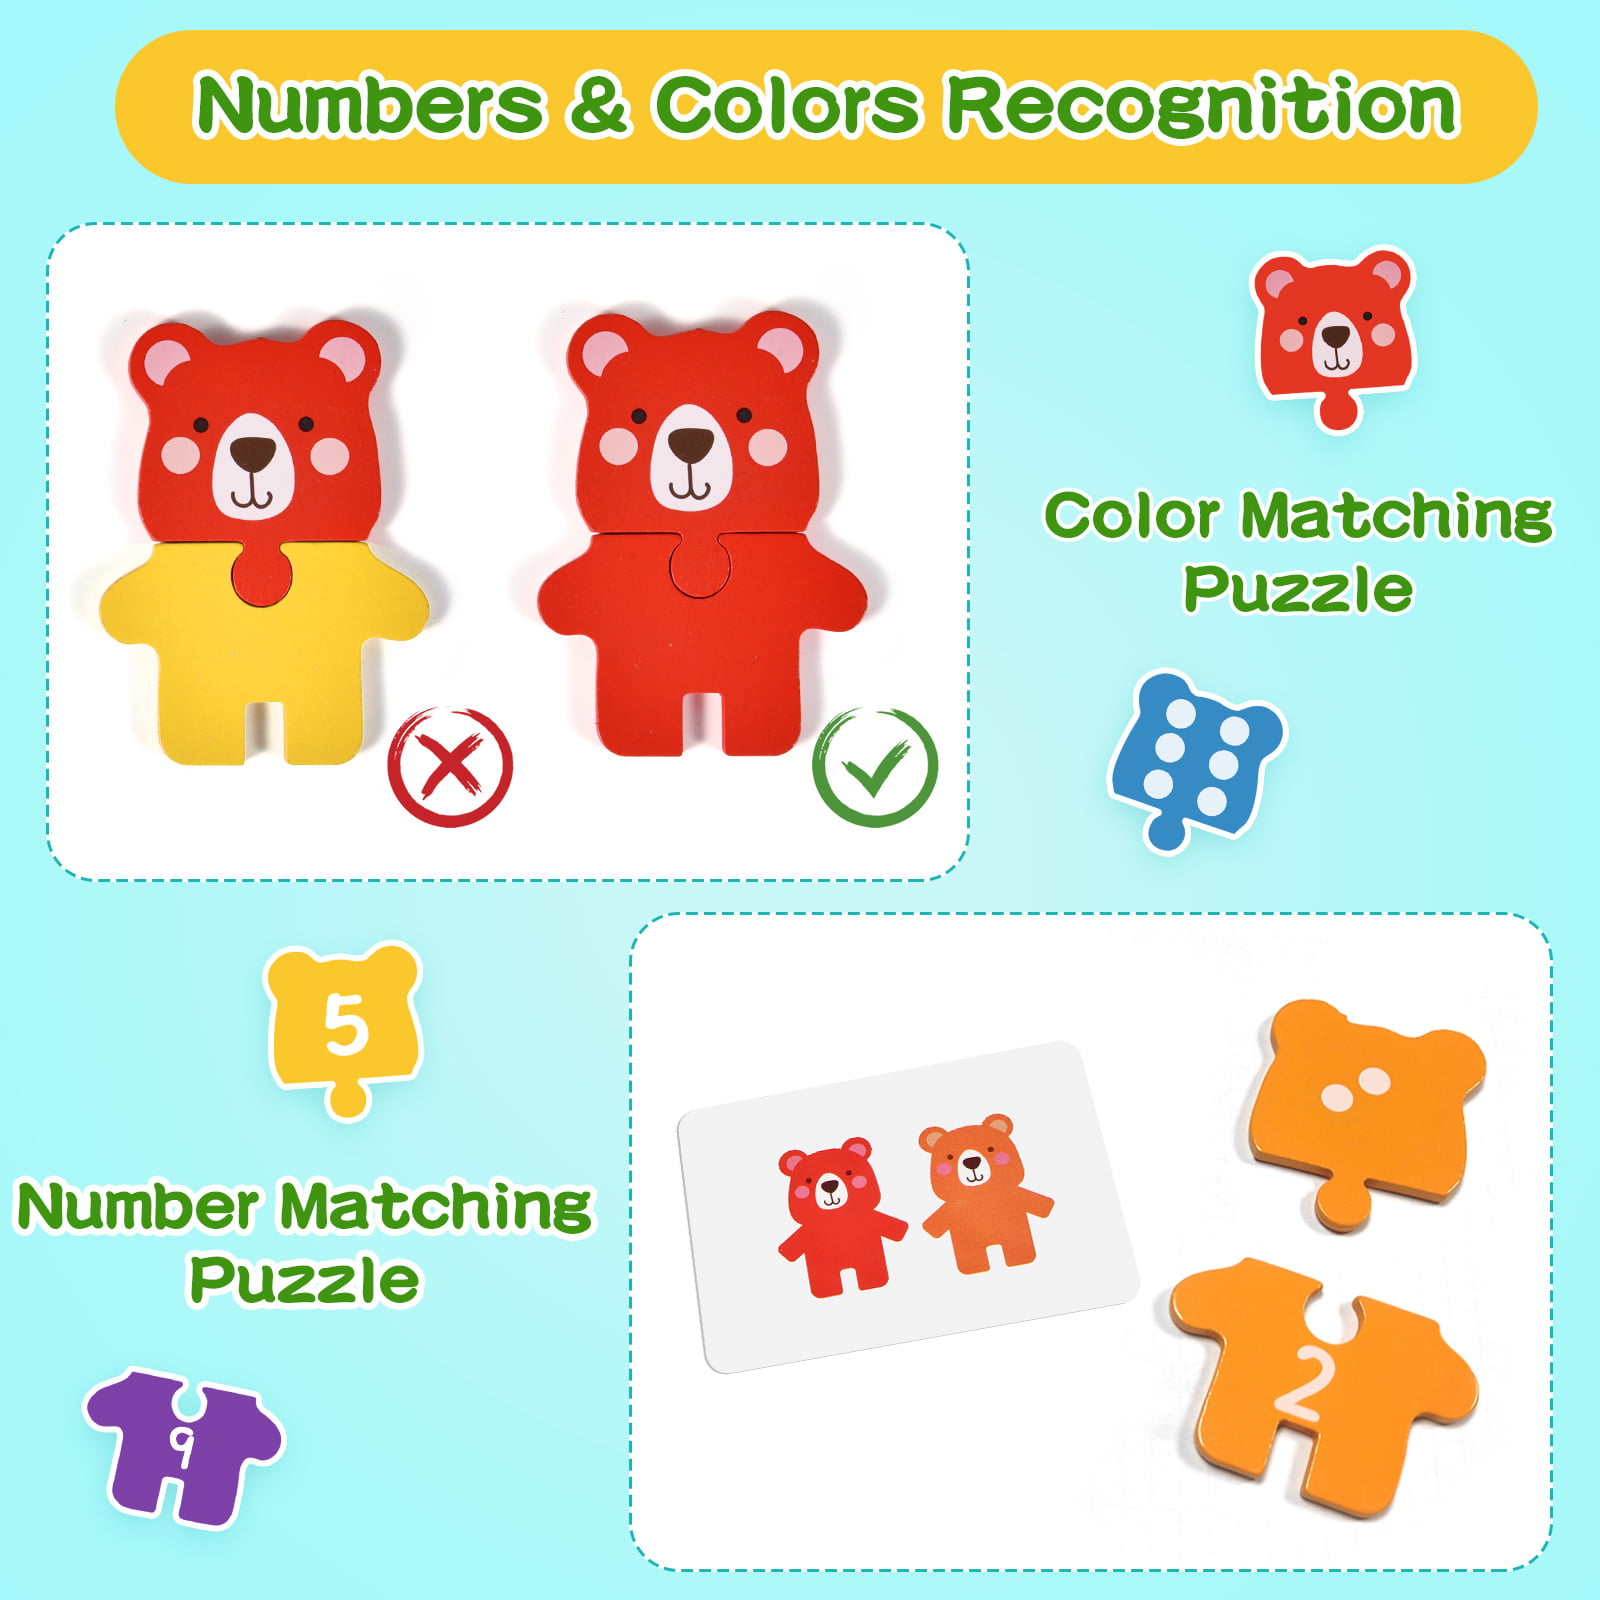 We Paint by Numbers. Puzzle Game for Children Education. Numbers